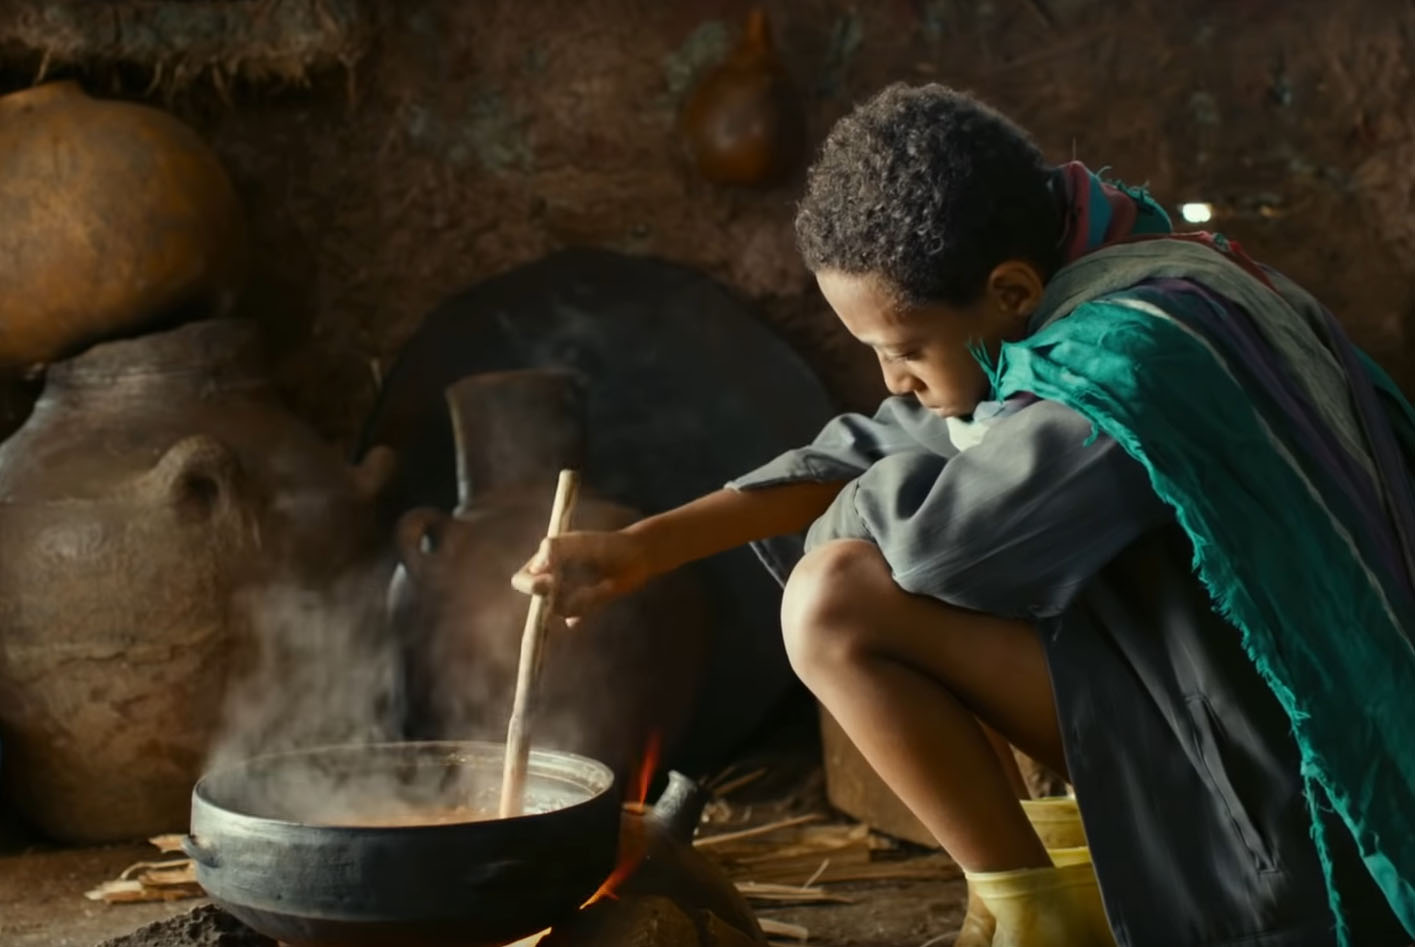 In the movie Lamb, a Black boy sits a black pot with a wooden spoon in a dimly lit room. Photo by Kimstim Films.